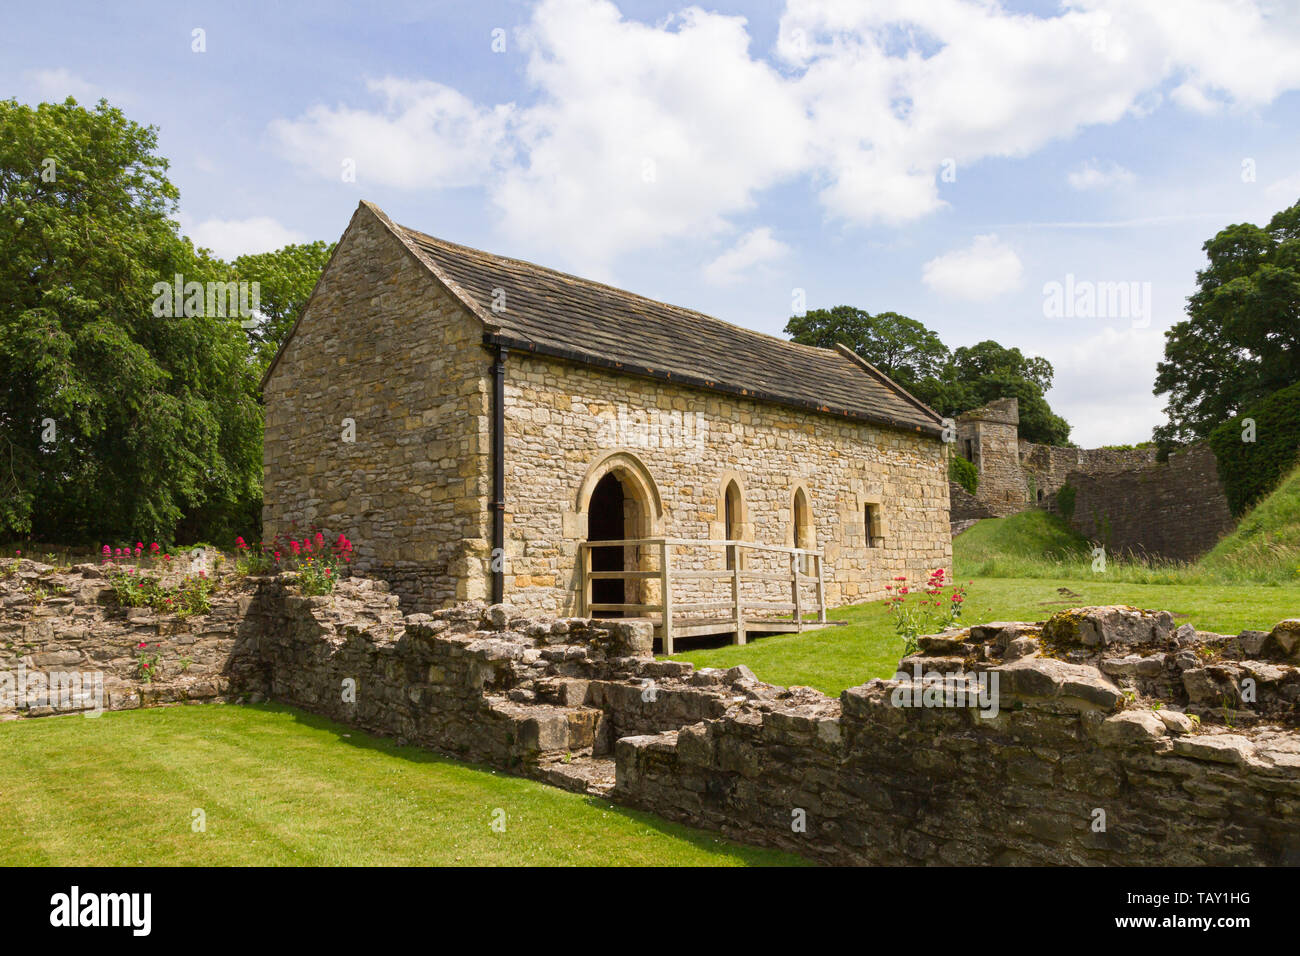 Pickering, North Yorkshire, UK: Restored restored chantry chapel stands next to ruined walls of the Old Hall in the inner bailey of Pickering Castle. Stock Photo